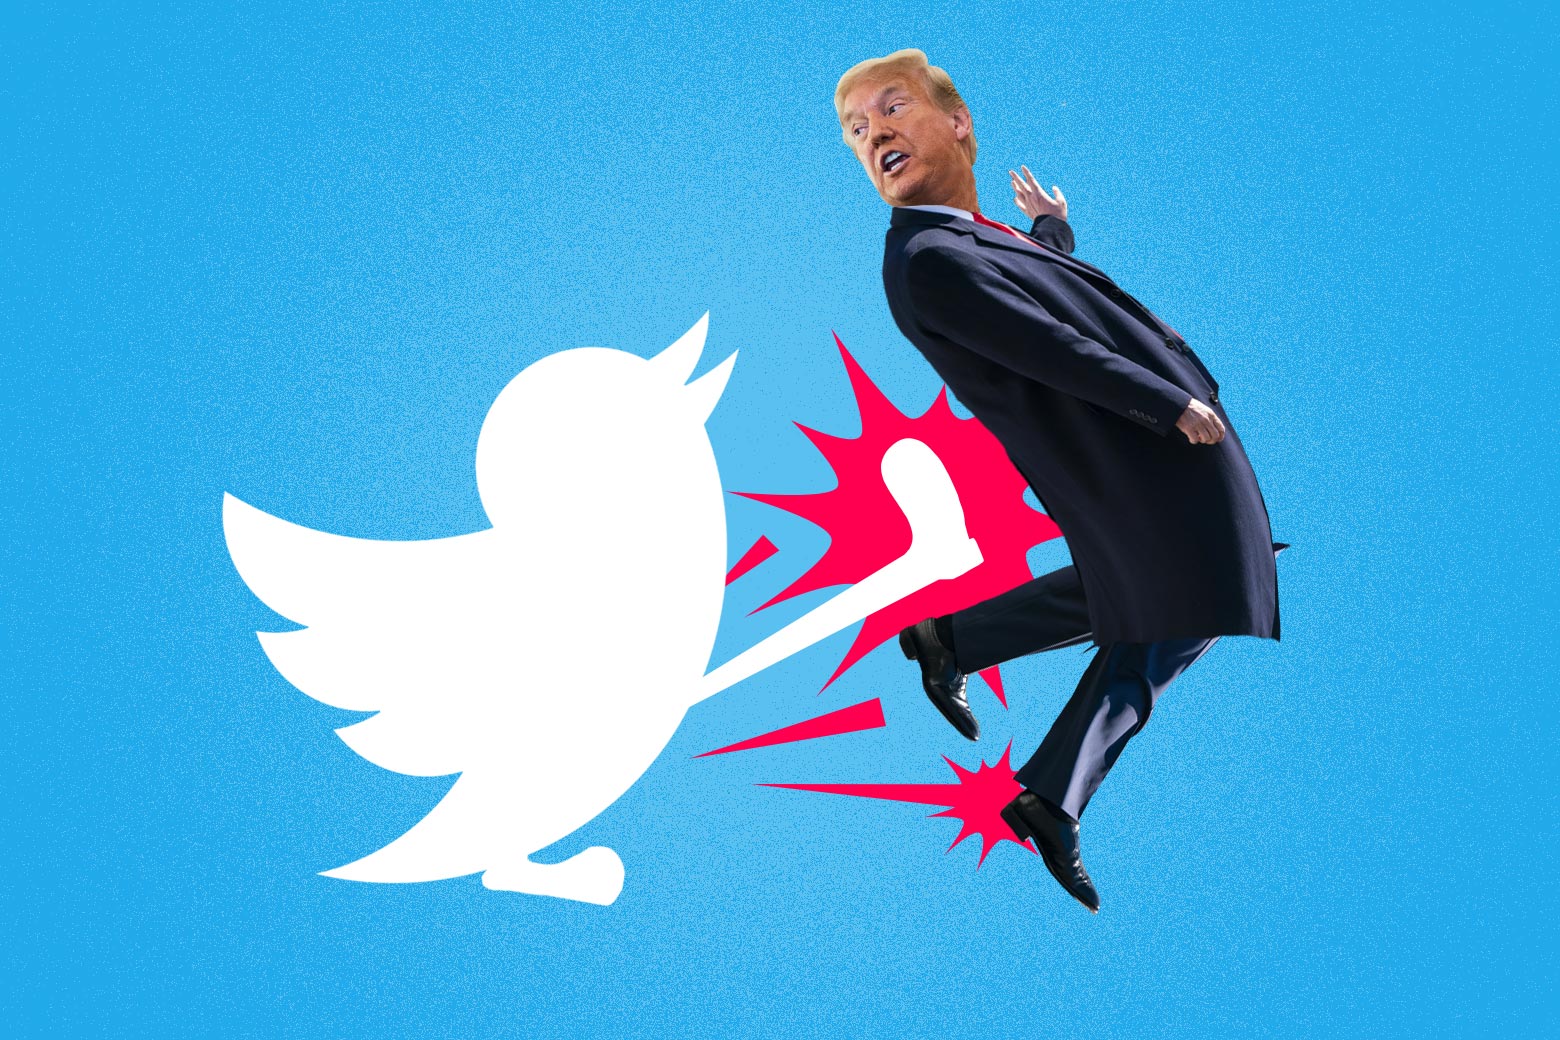 Collage of Trump getting kicked by a twitter bird. 